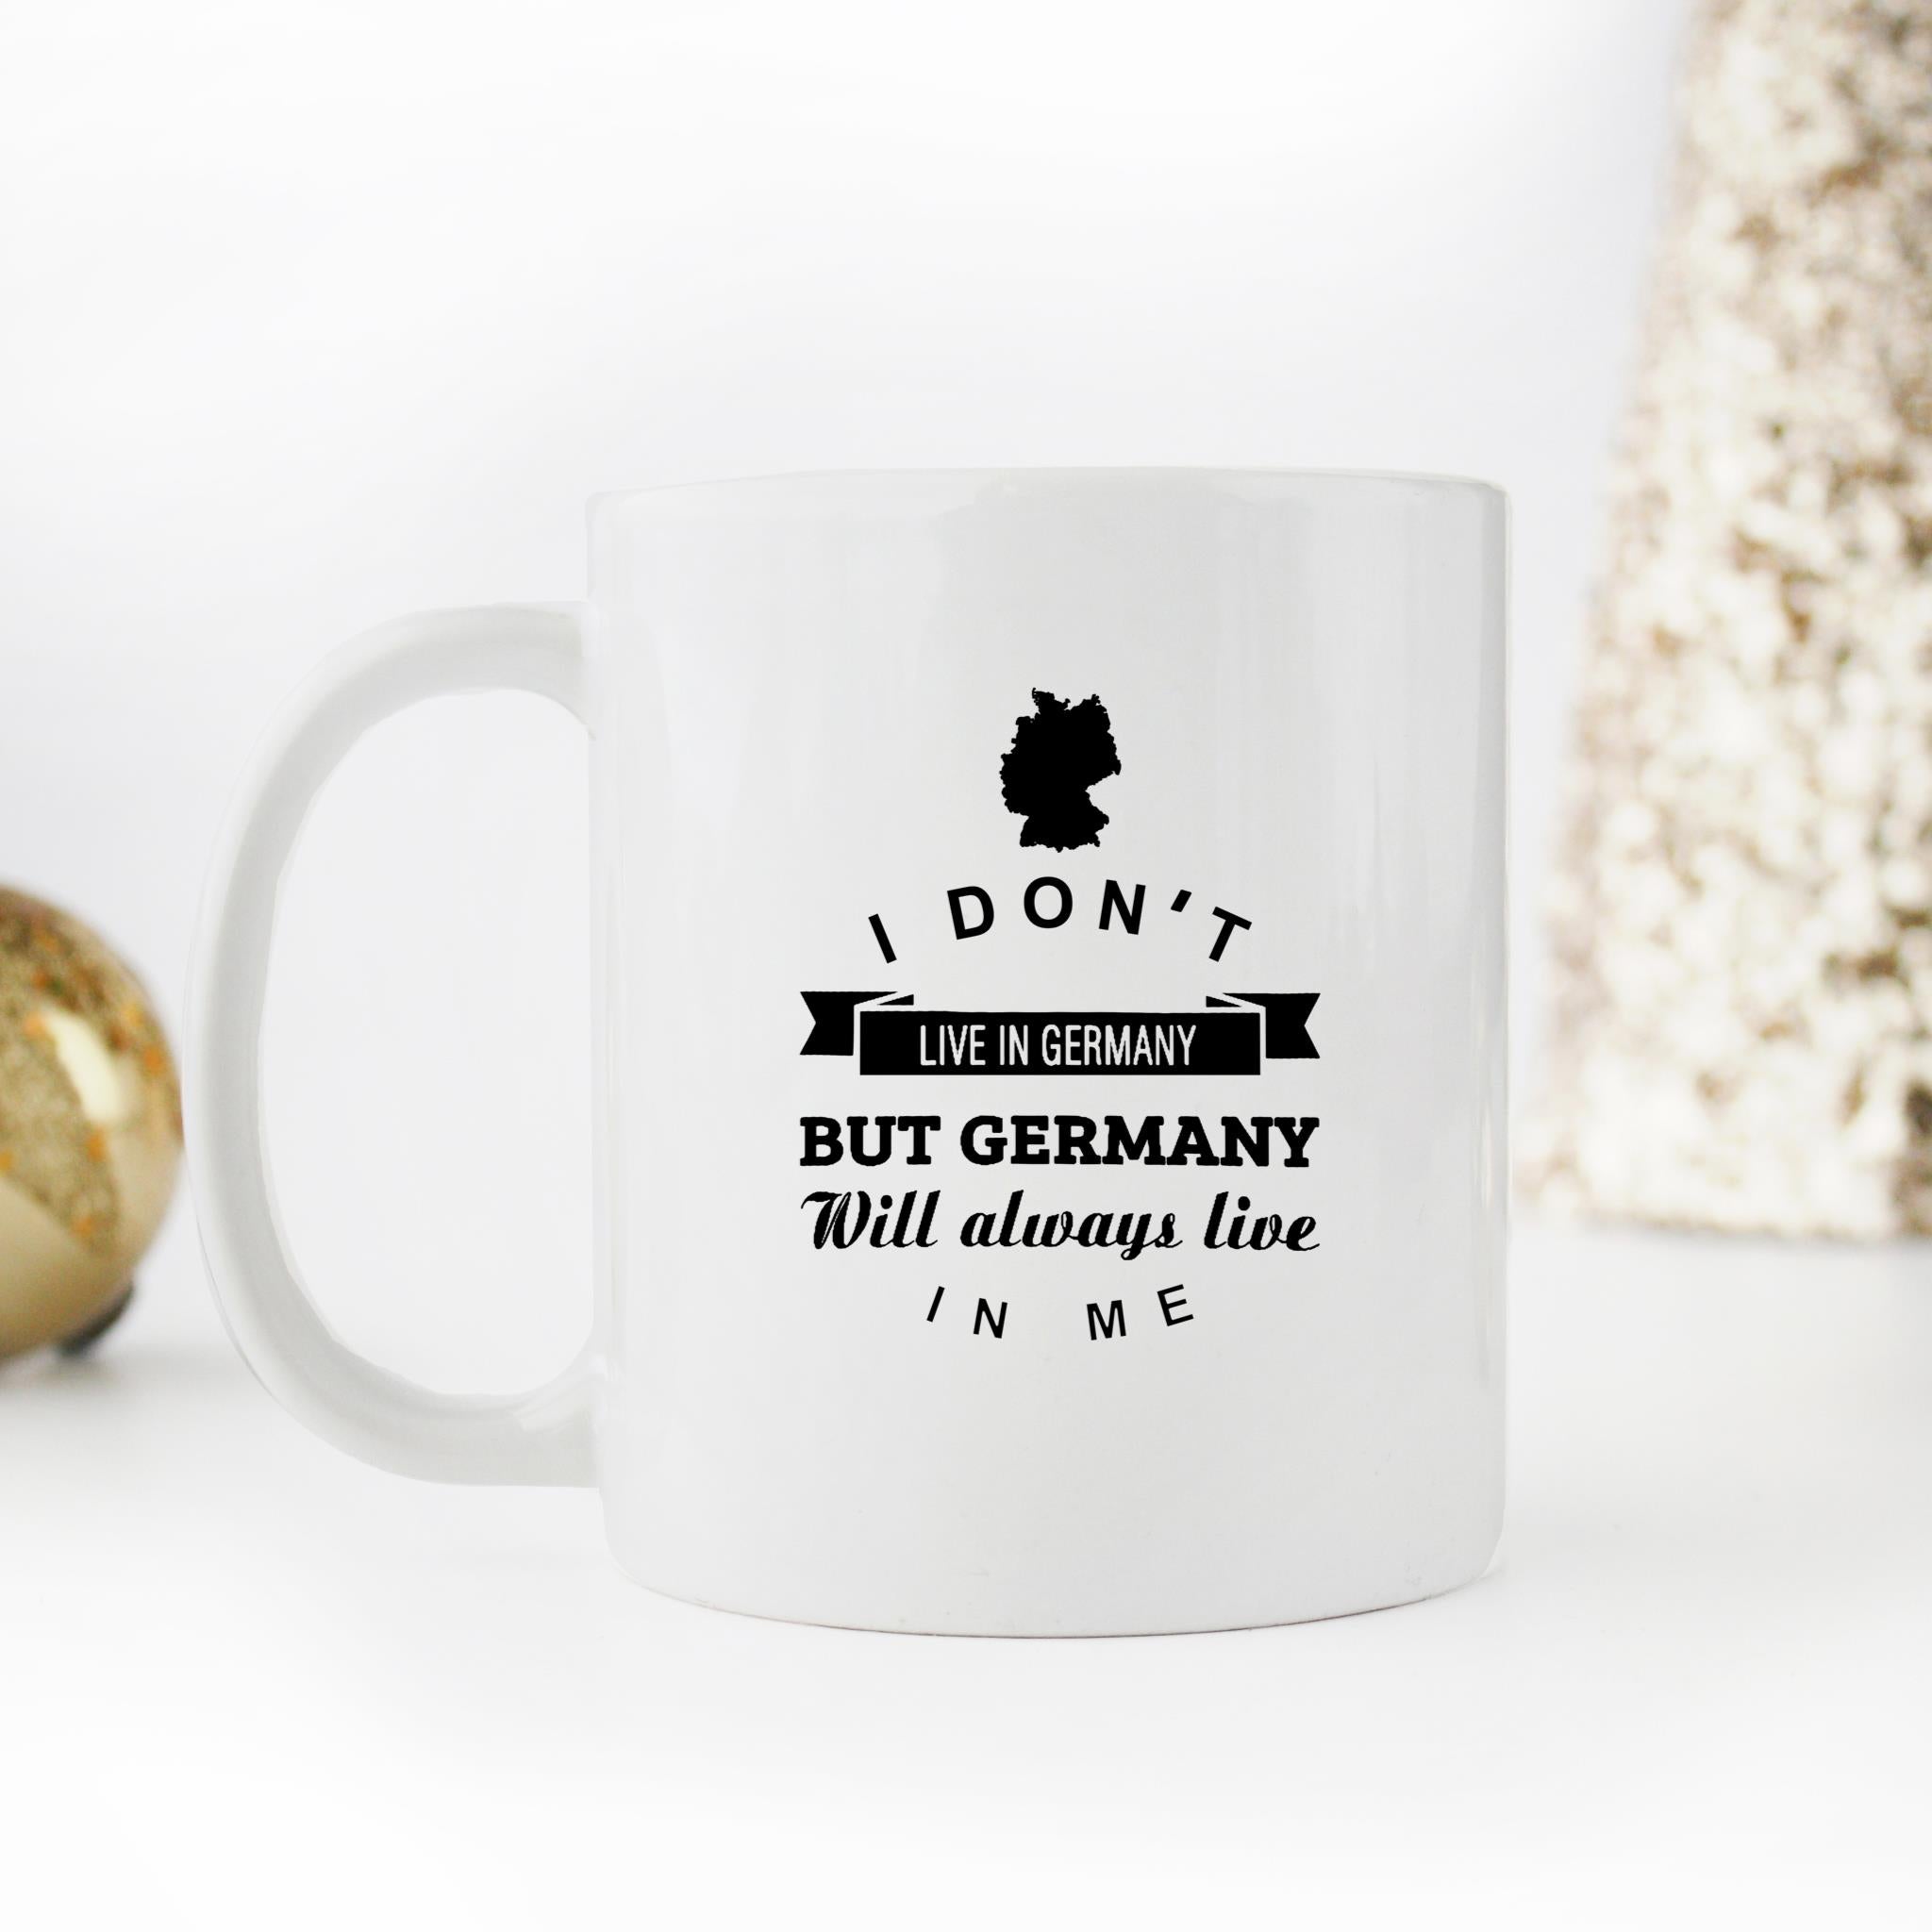 Skitongifts Funny Ceramic Novelty Coffee Mug I Don't Live In Germany But Germany Always Live In Me 1qUi6bA